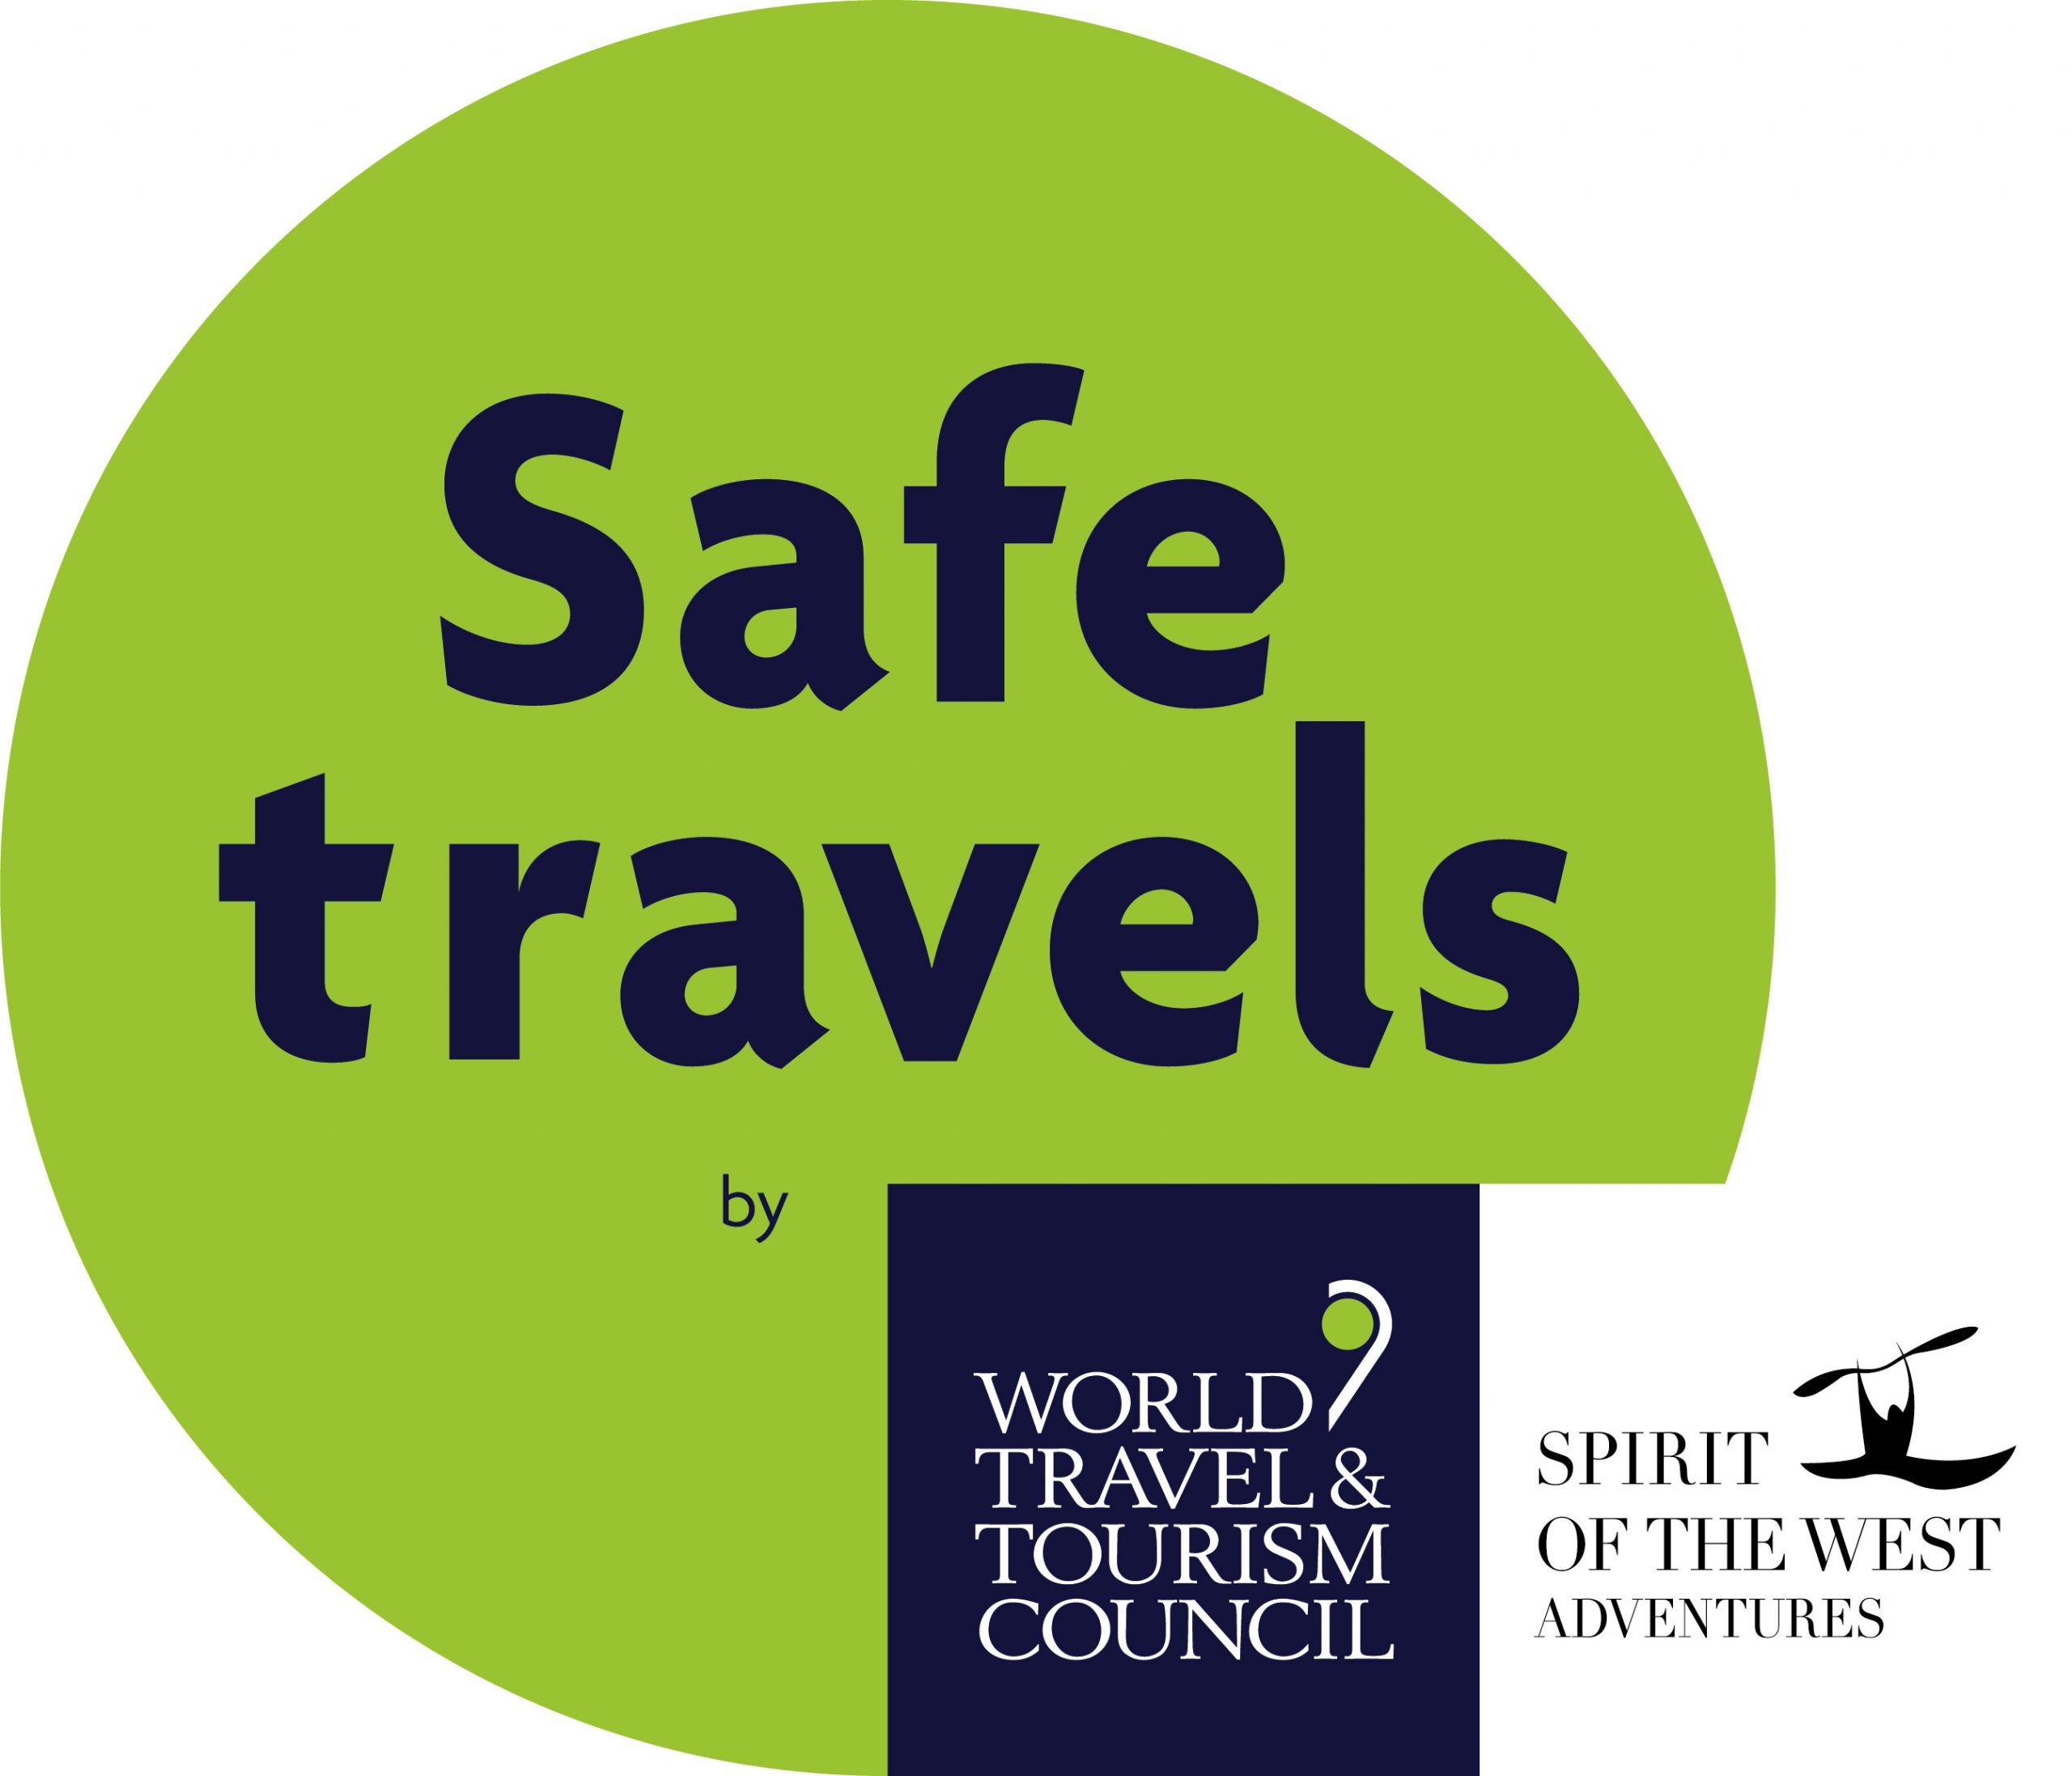 "Safe Travel Stamp" awarded by the World Travel & Tourism Council